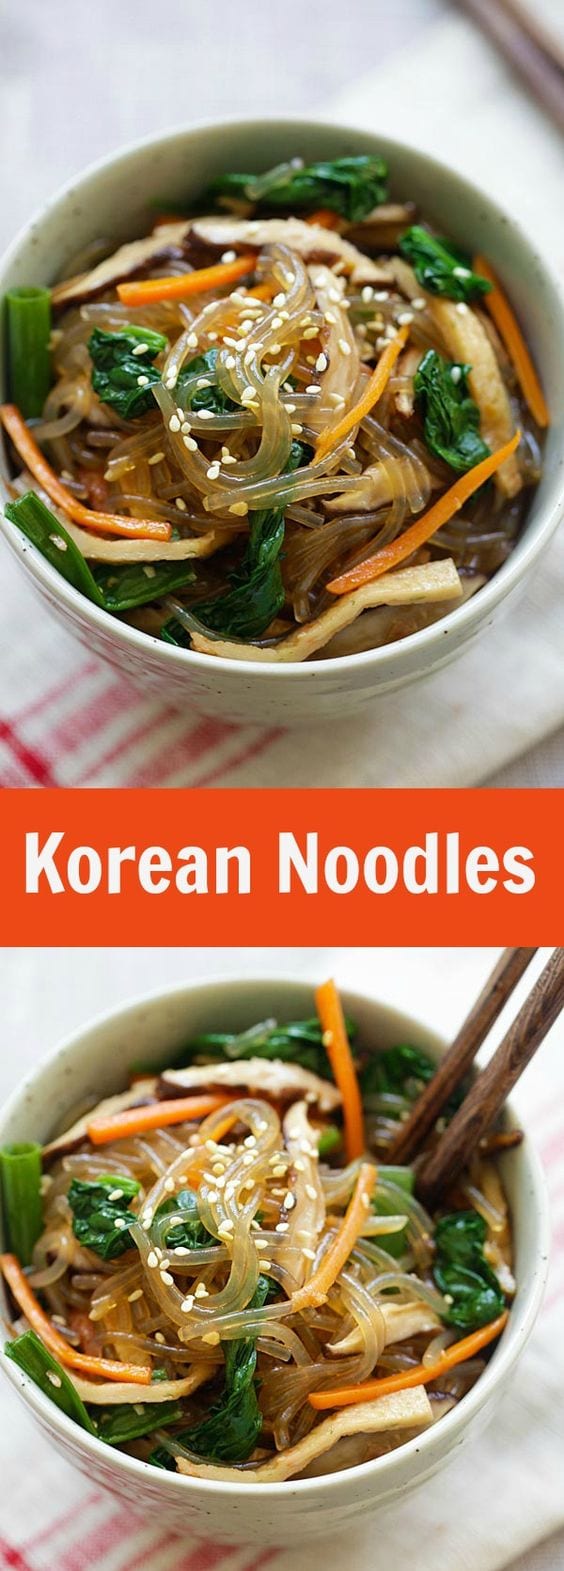 Japchae or chap chae is a popular Korean noodle dish made with sweet potato noodles. Learn how to make japchae at home in 30 minutes. Easy japchae recipe. | rasamalaysia.com